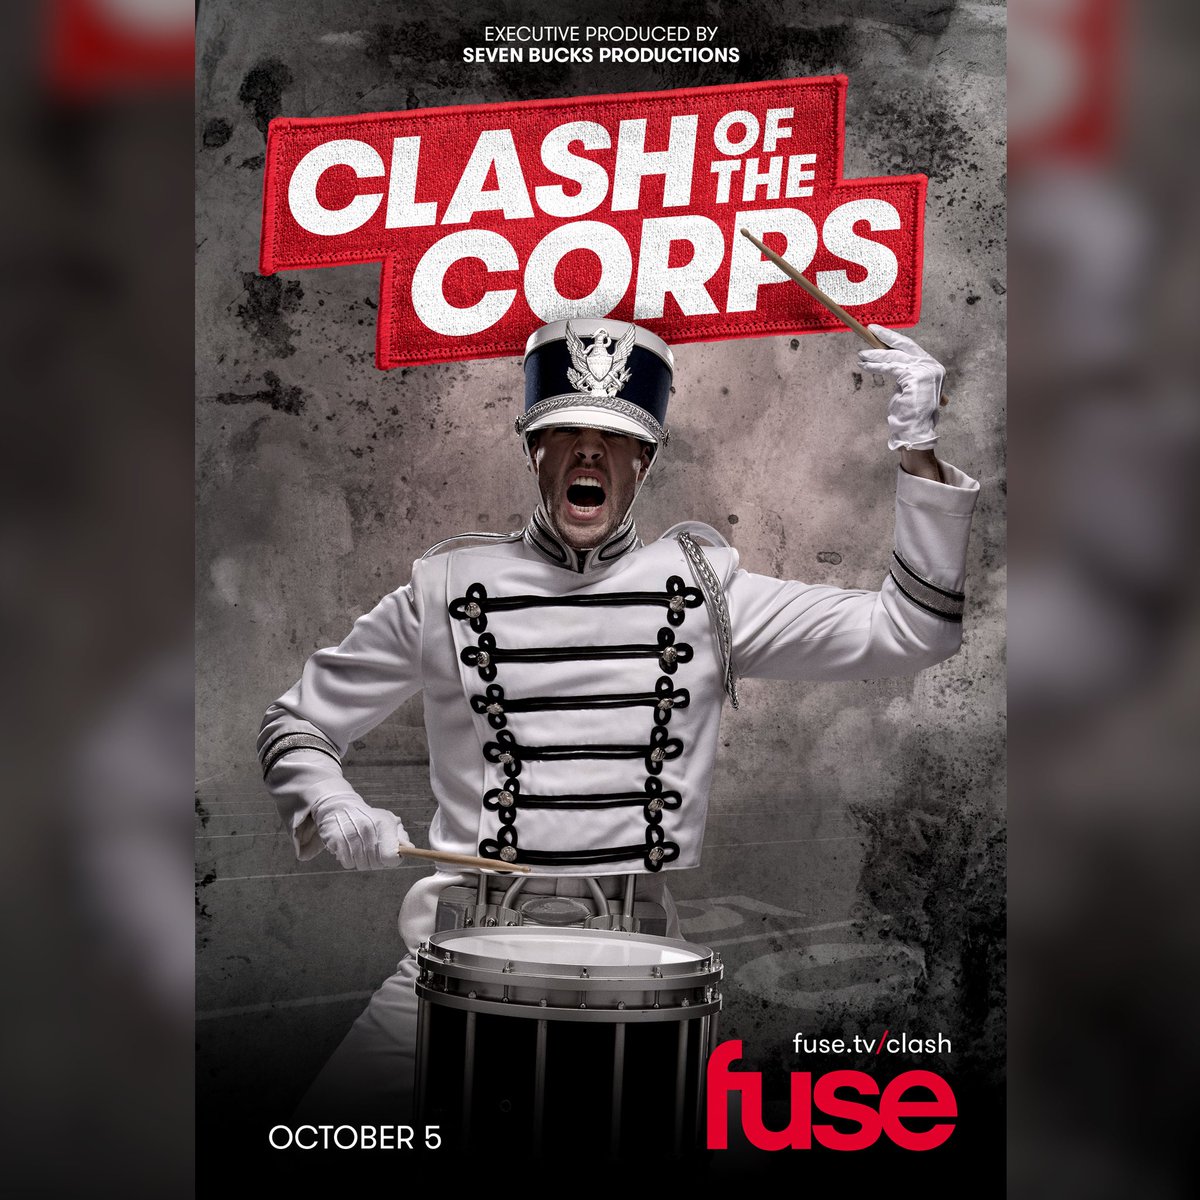 Our @SevenBucksProd's is bringing you inside the drum corps world! #ClashOfTheCorps on @fuse
https://t.co/2PGvyAkRy1 https://t.co/gbrA58mrq5